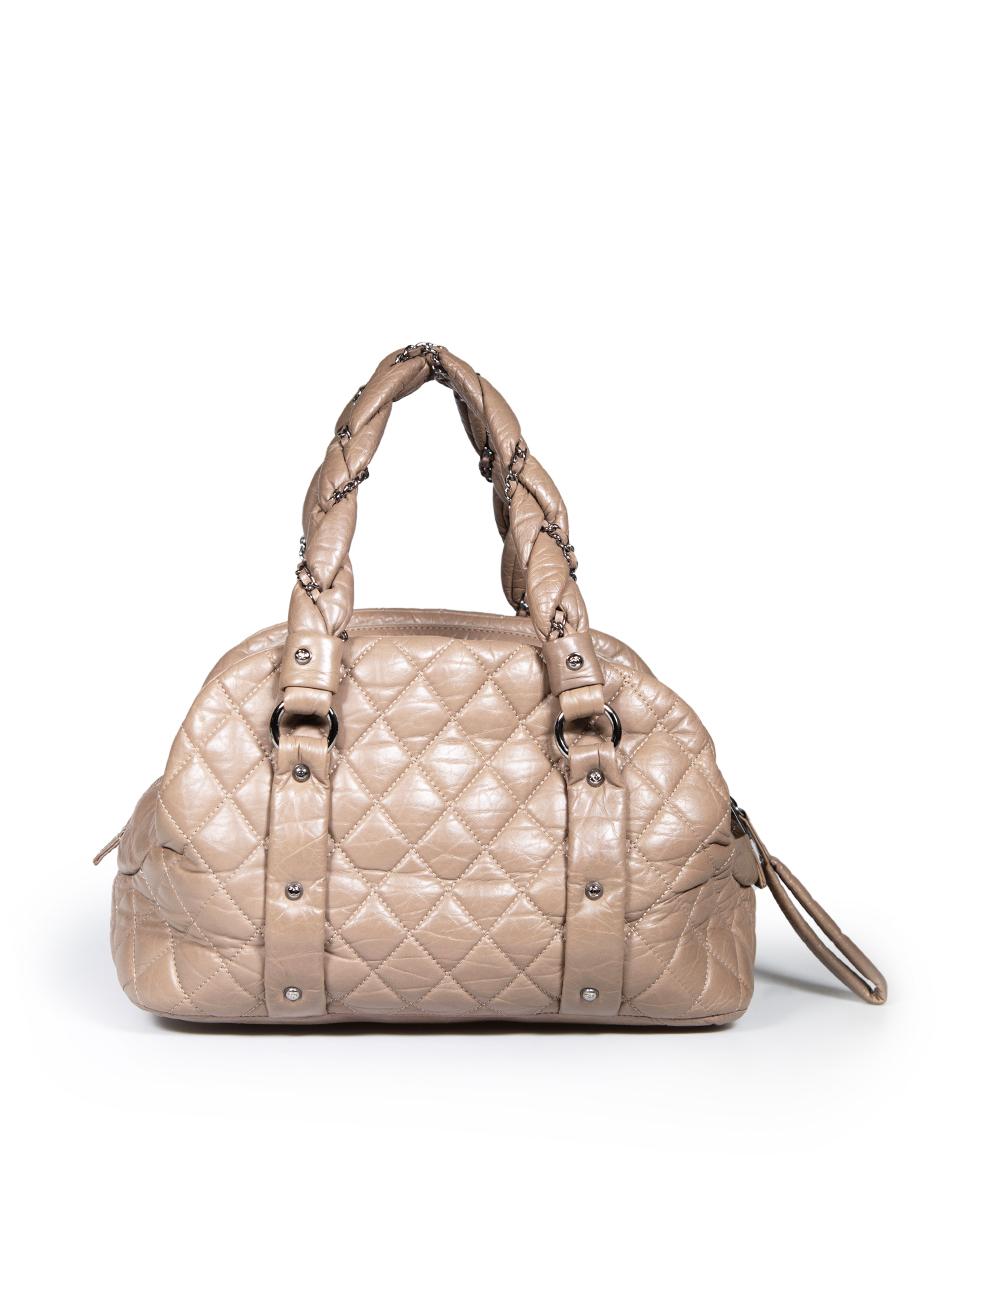 Chanel 2005-2006 Brown Lambskin Quilted Lady Braid Bowler Bag In Good Condition For Sale In London, GB